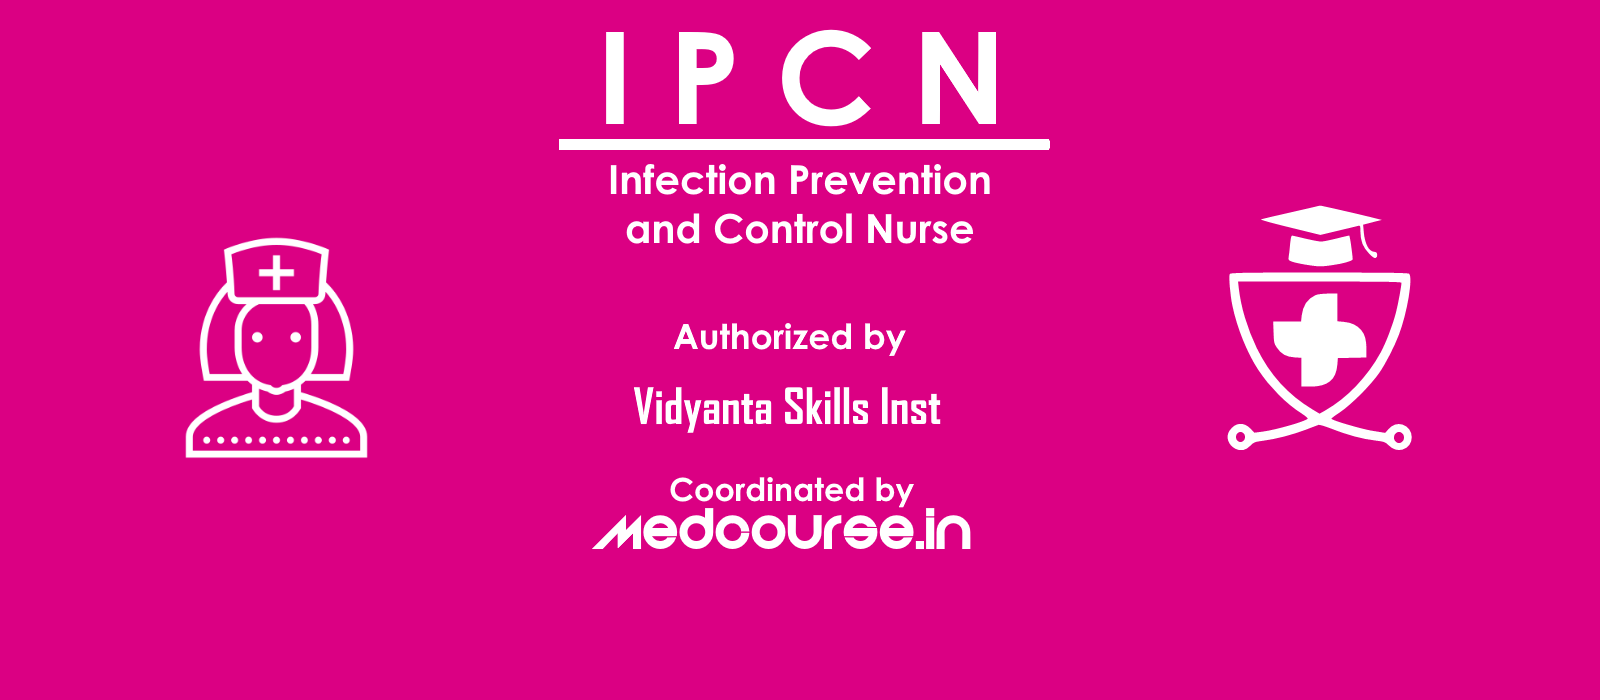 Infection prevention and control nurse course